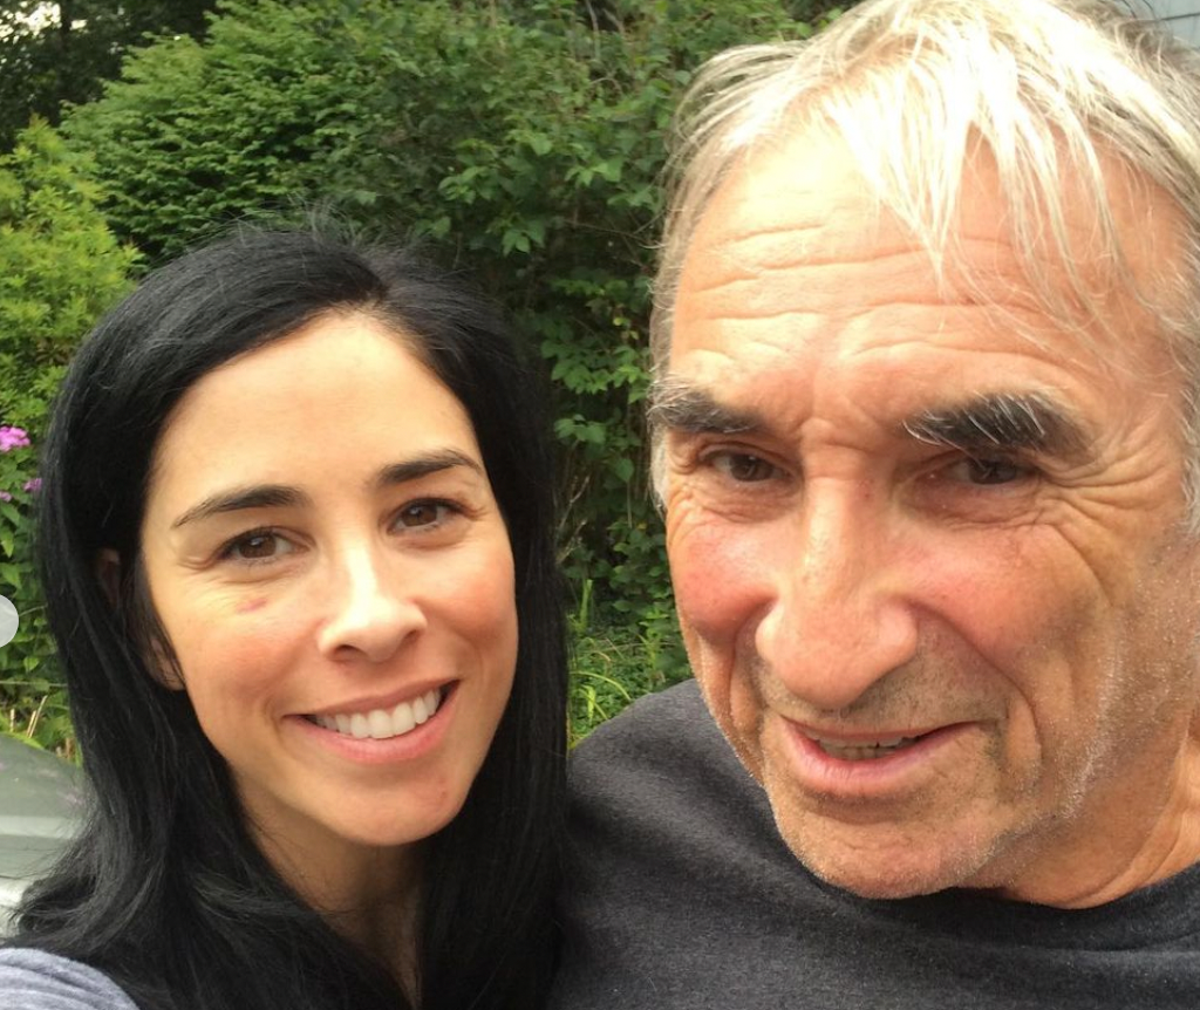 Sarah Silverman pays tribute to ‘best pal’ father after his death